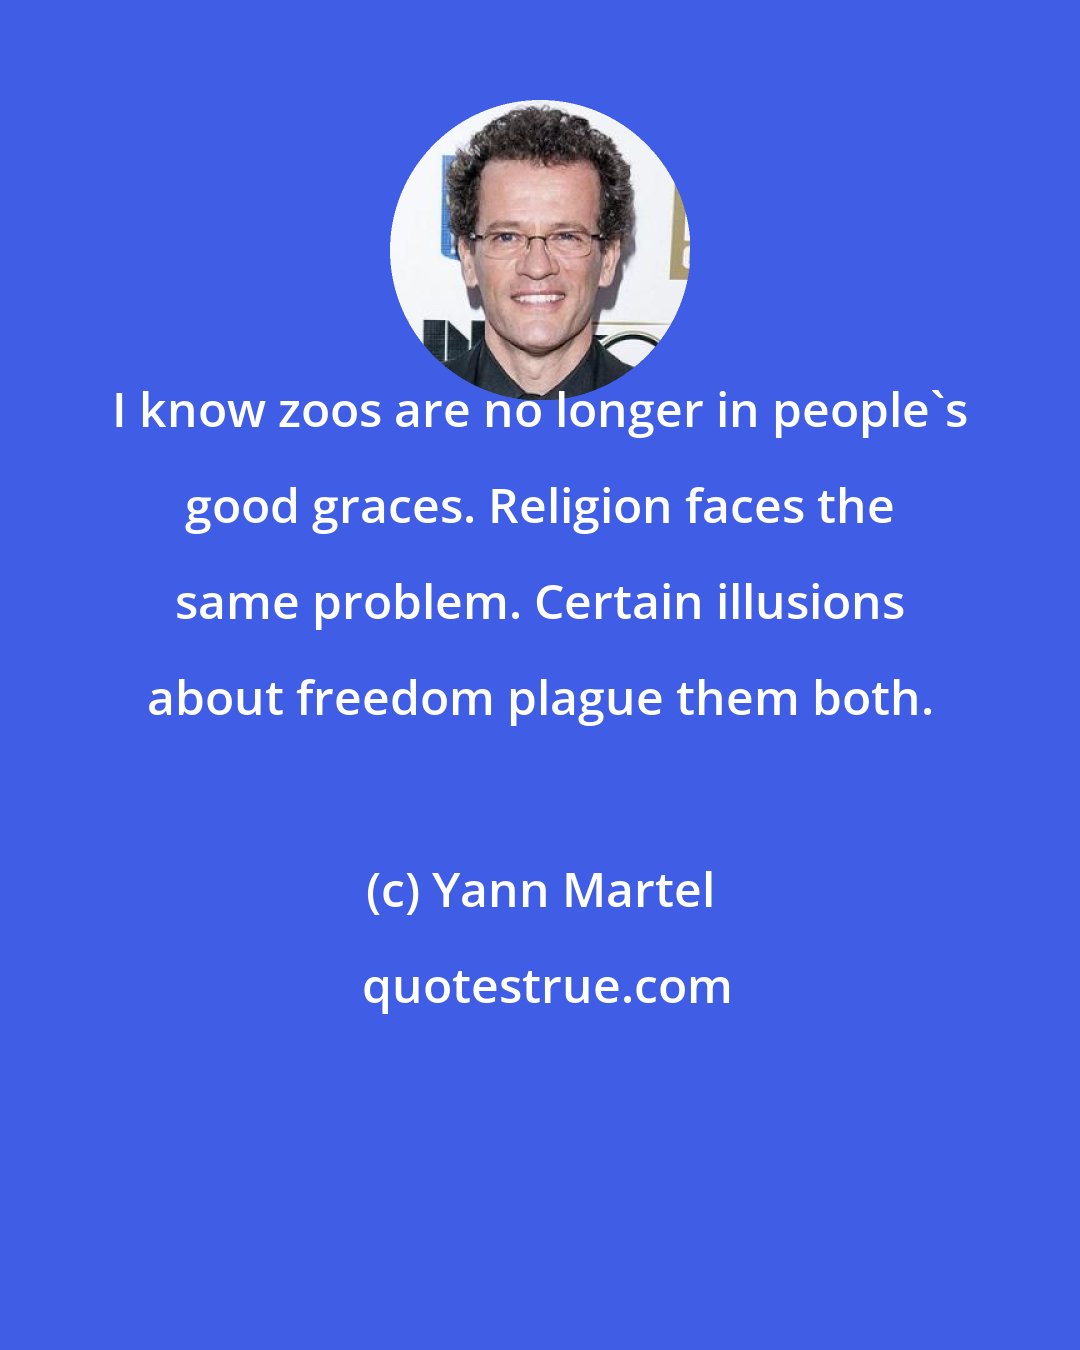 Yann Martel: I know zoos are no longer in people's good graces. Religion faces the same problem. Certain illusions about freedom plague them both.